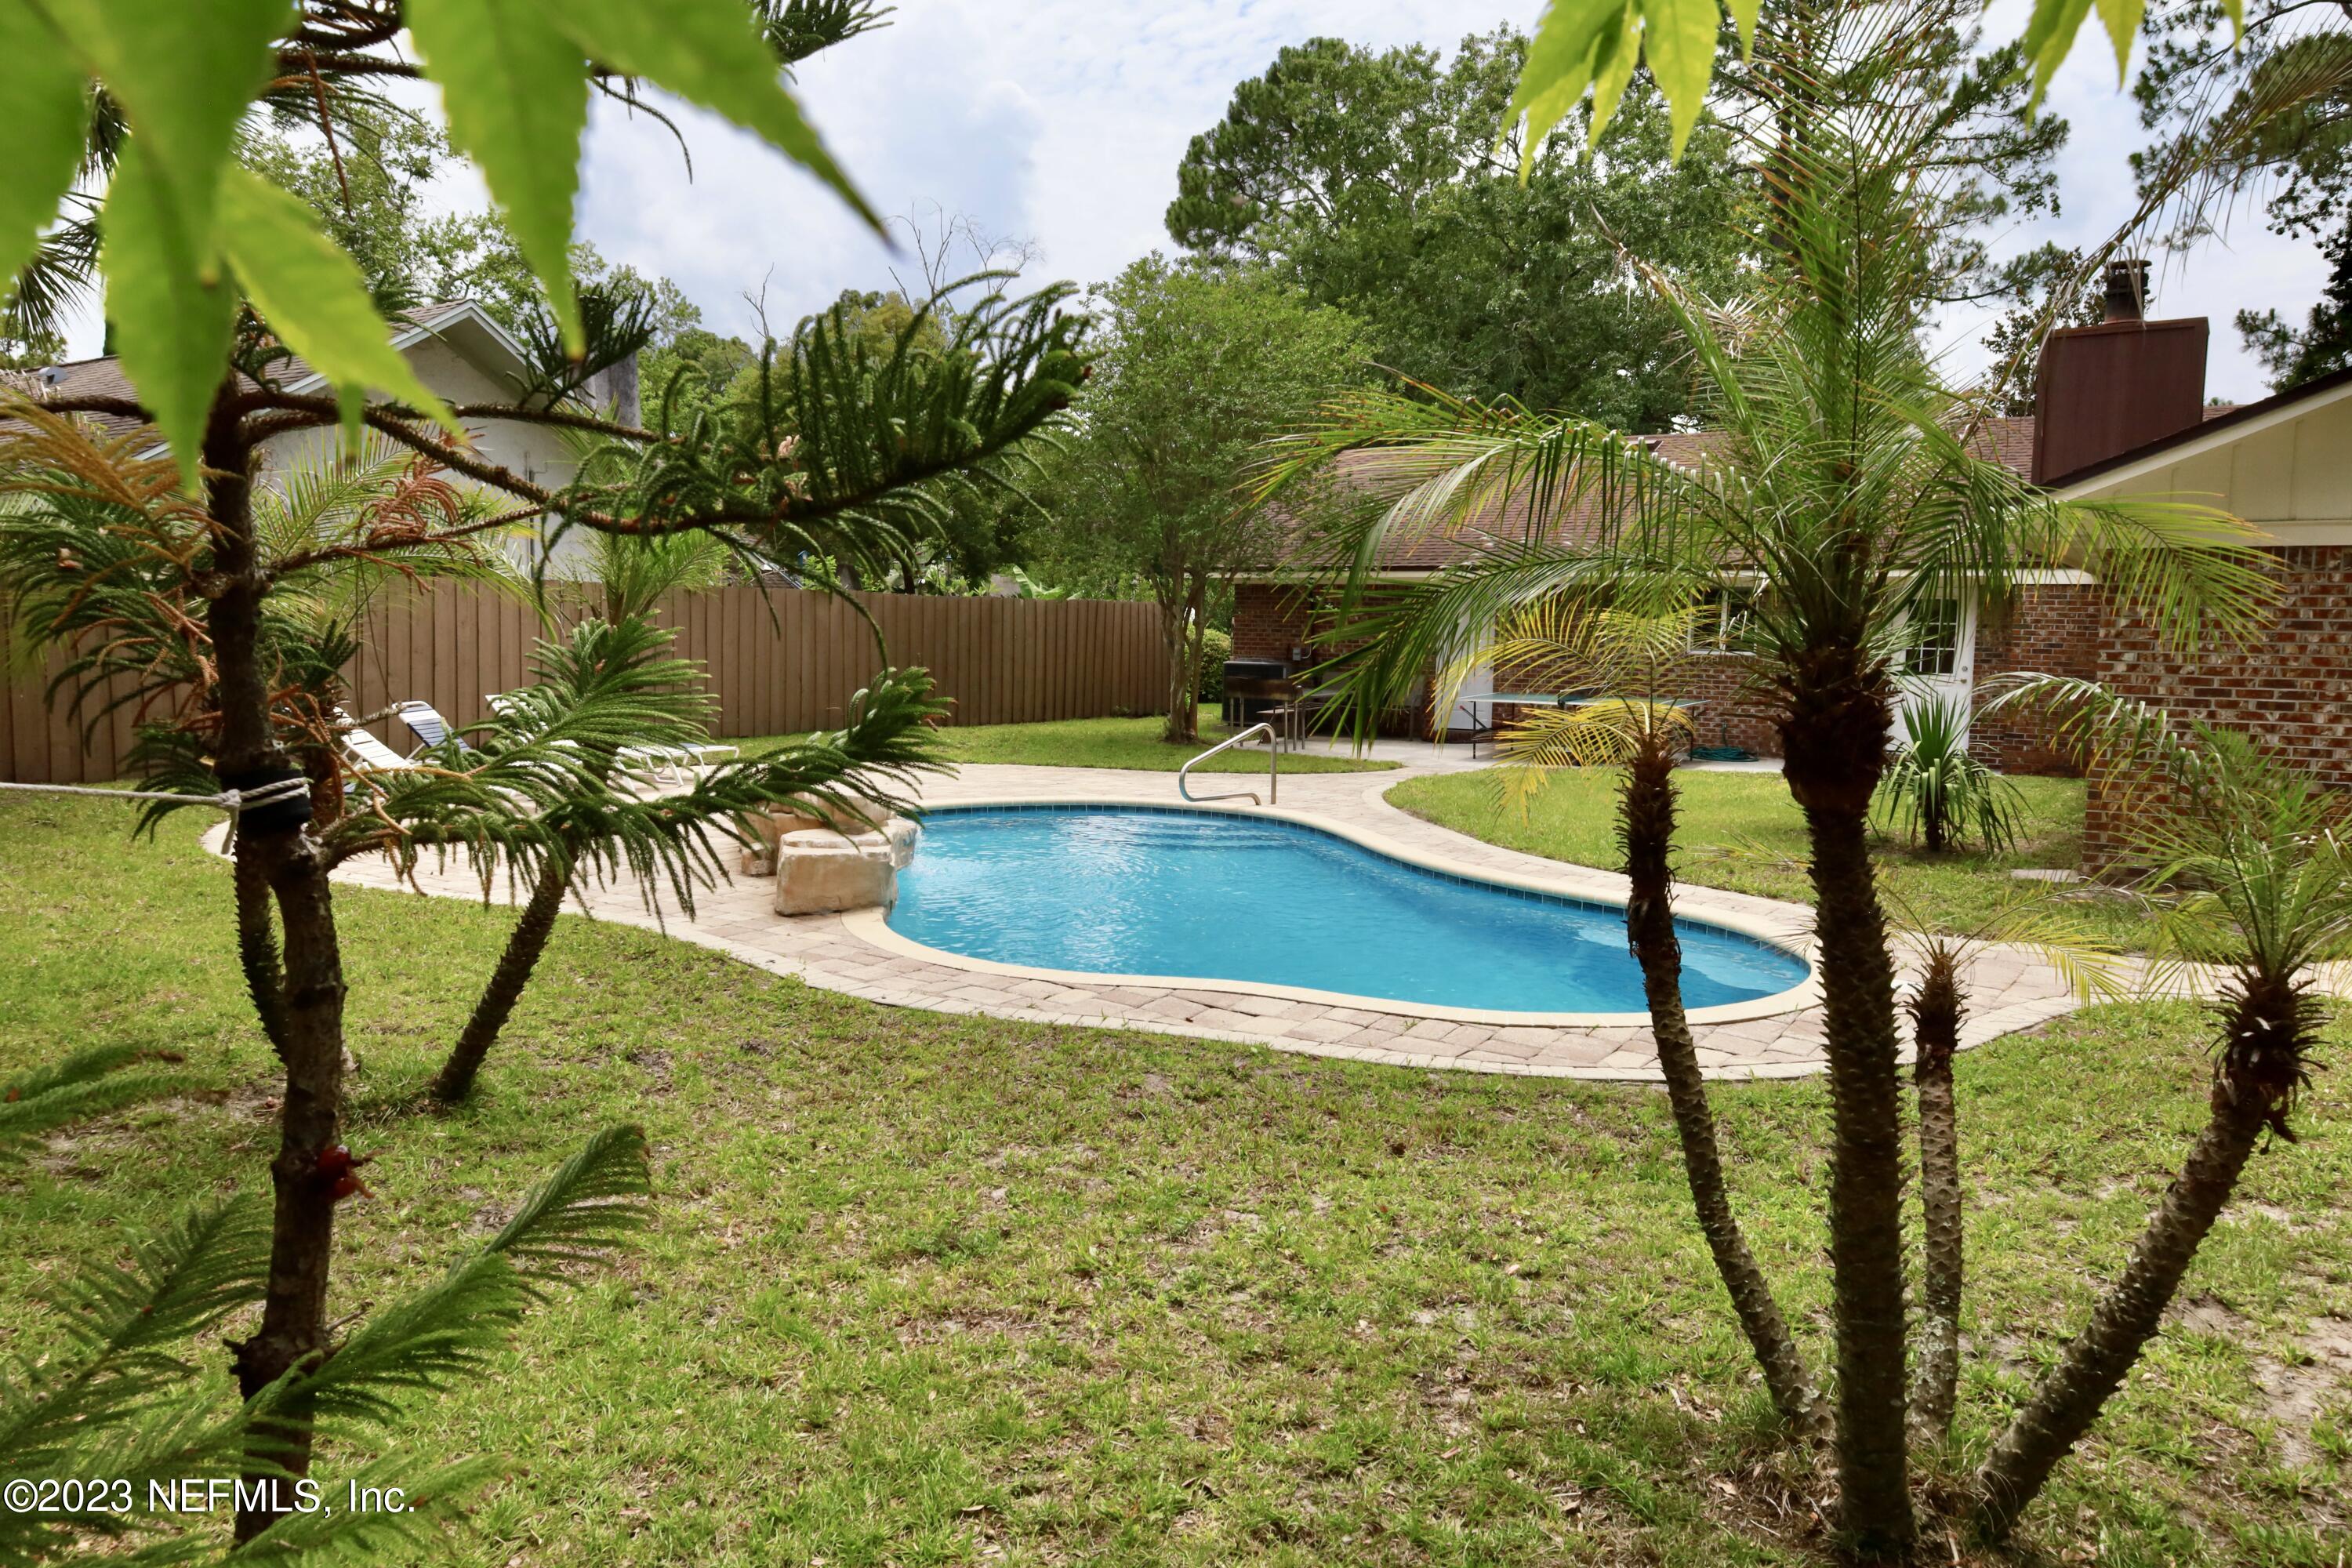 a view of swimming pool with a yard and sitting area